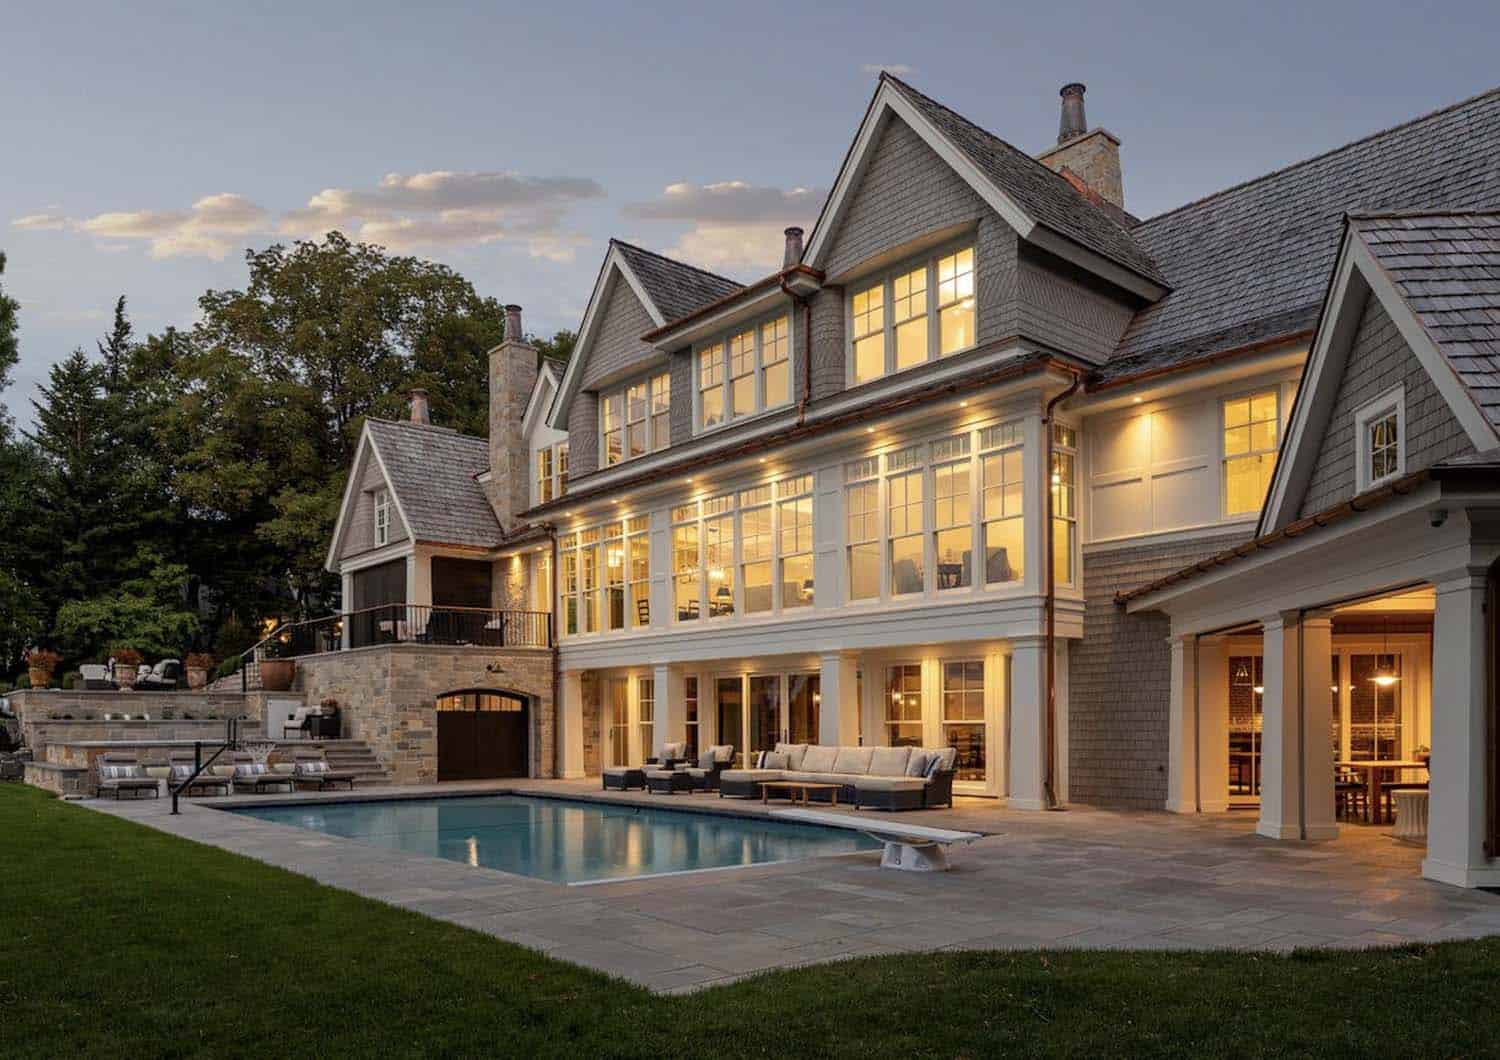 coastal-style-lake-house-exterior-with-a-pool-at-dusk